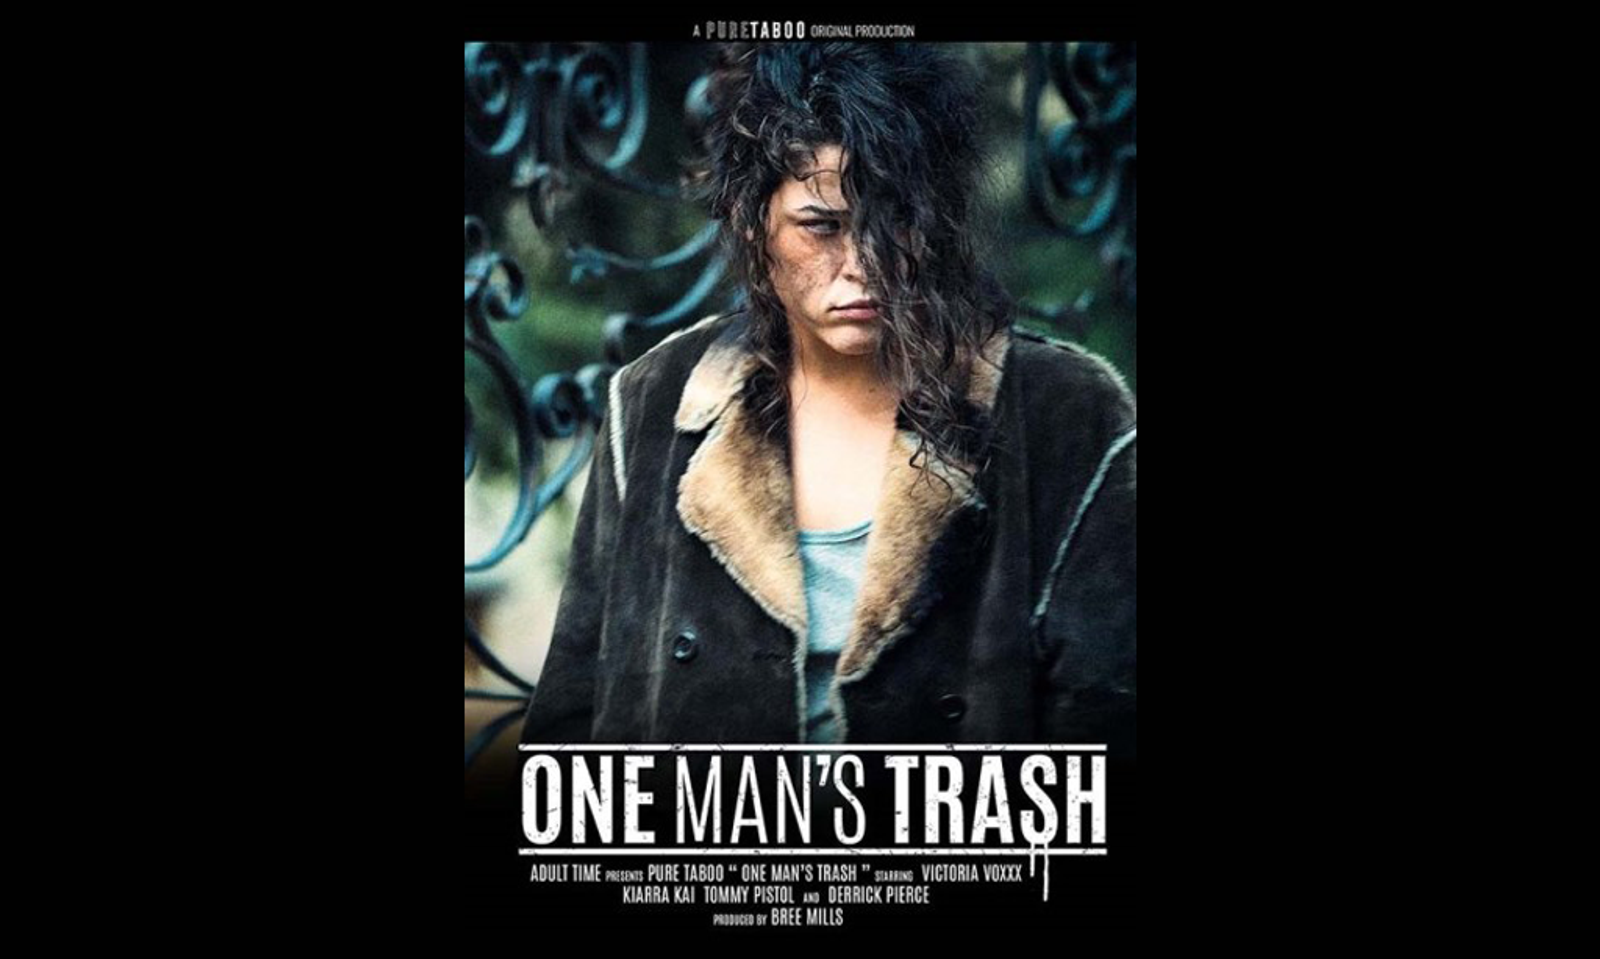 Pure Taboo's 'One Man's Trash' Comes to DVD